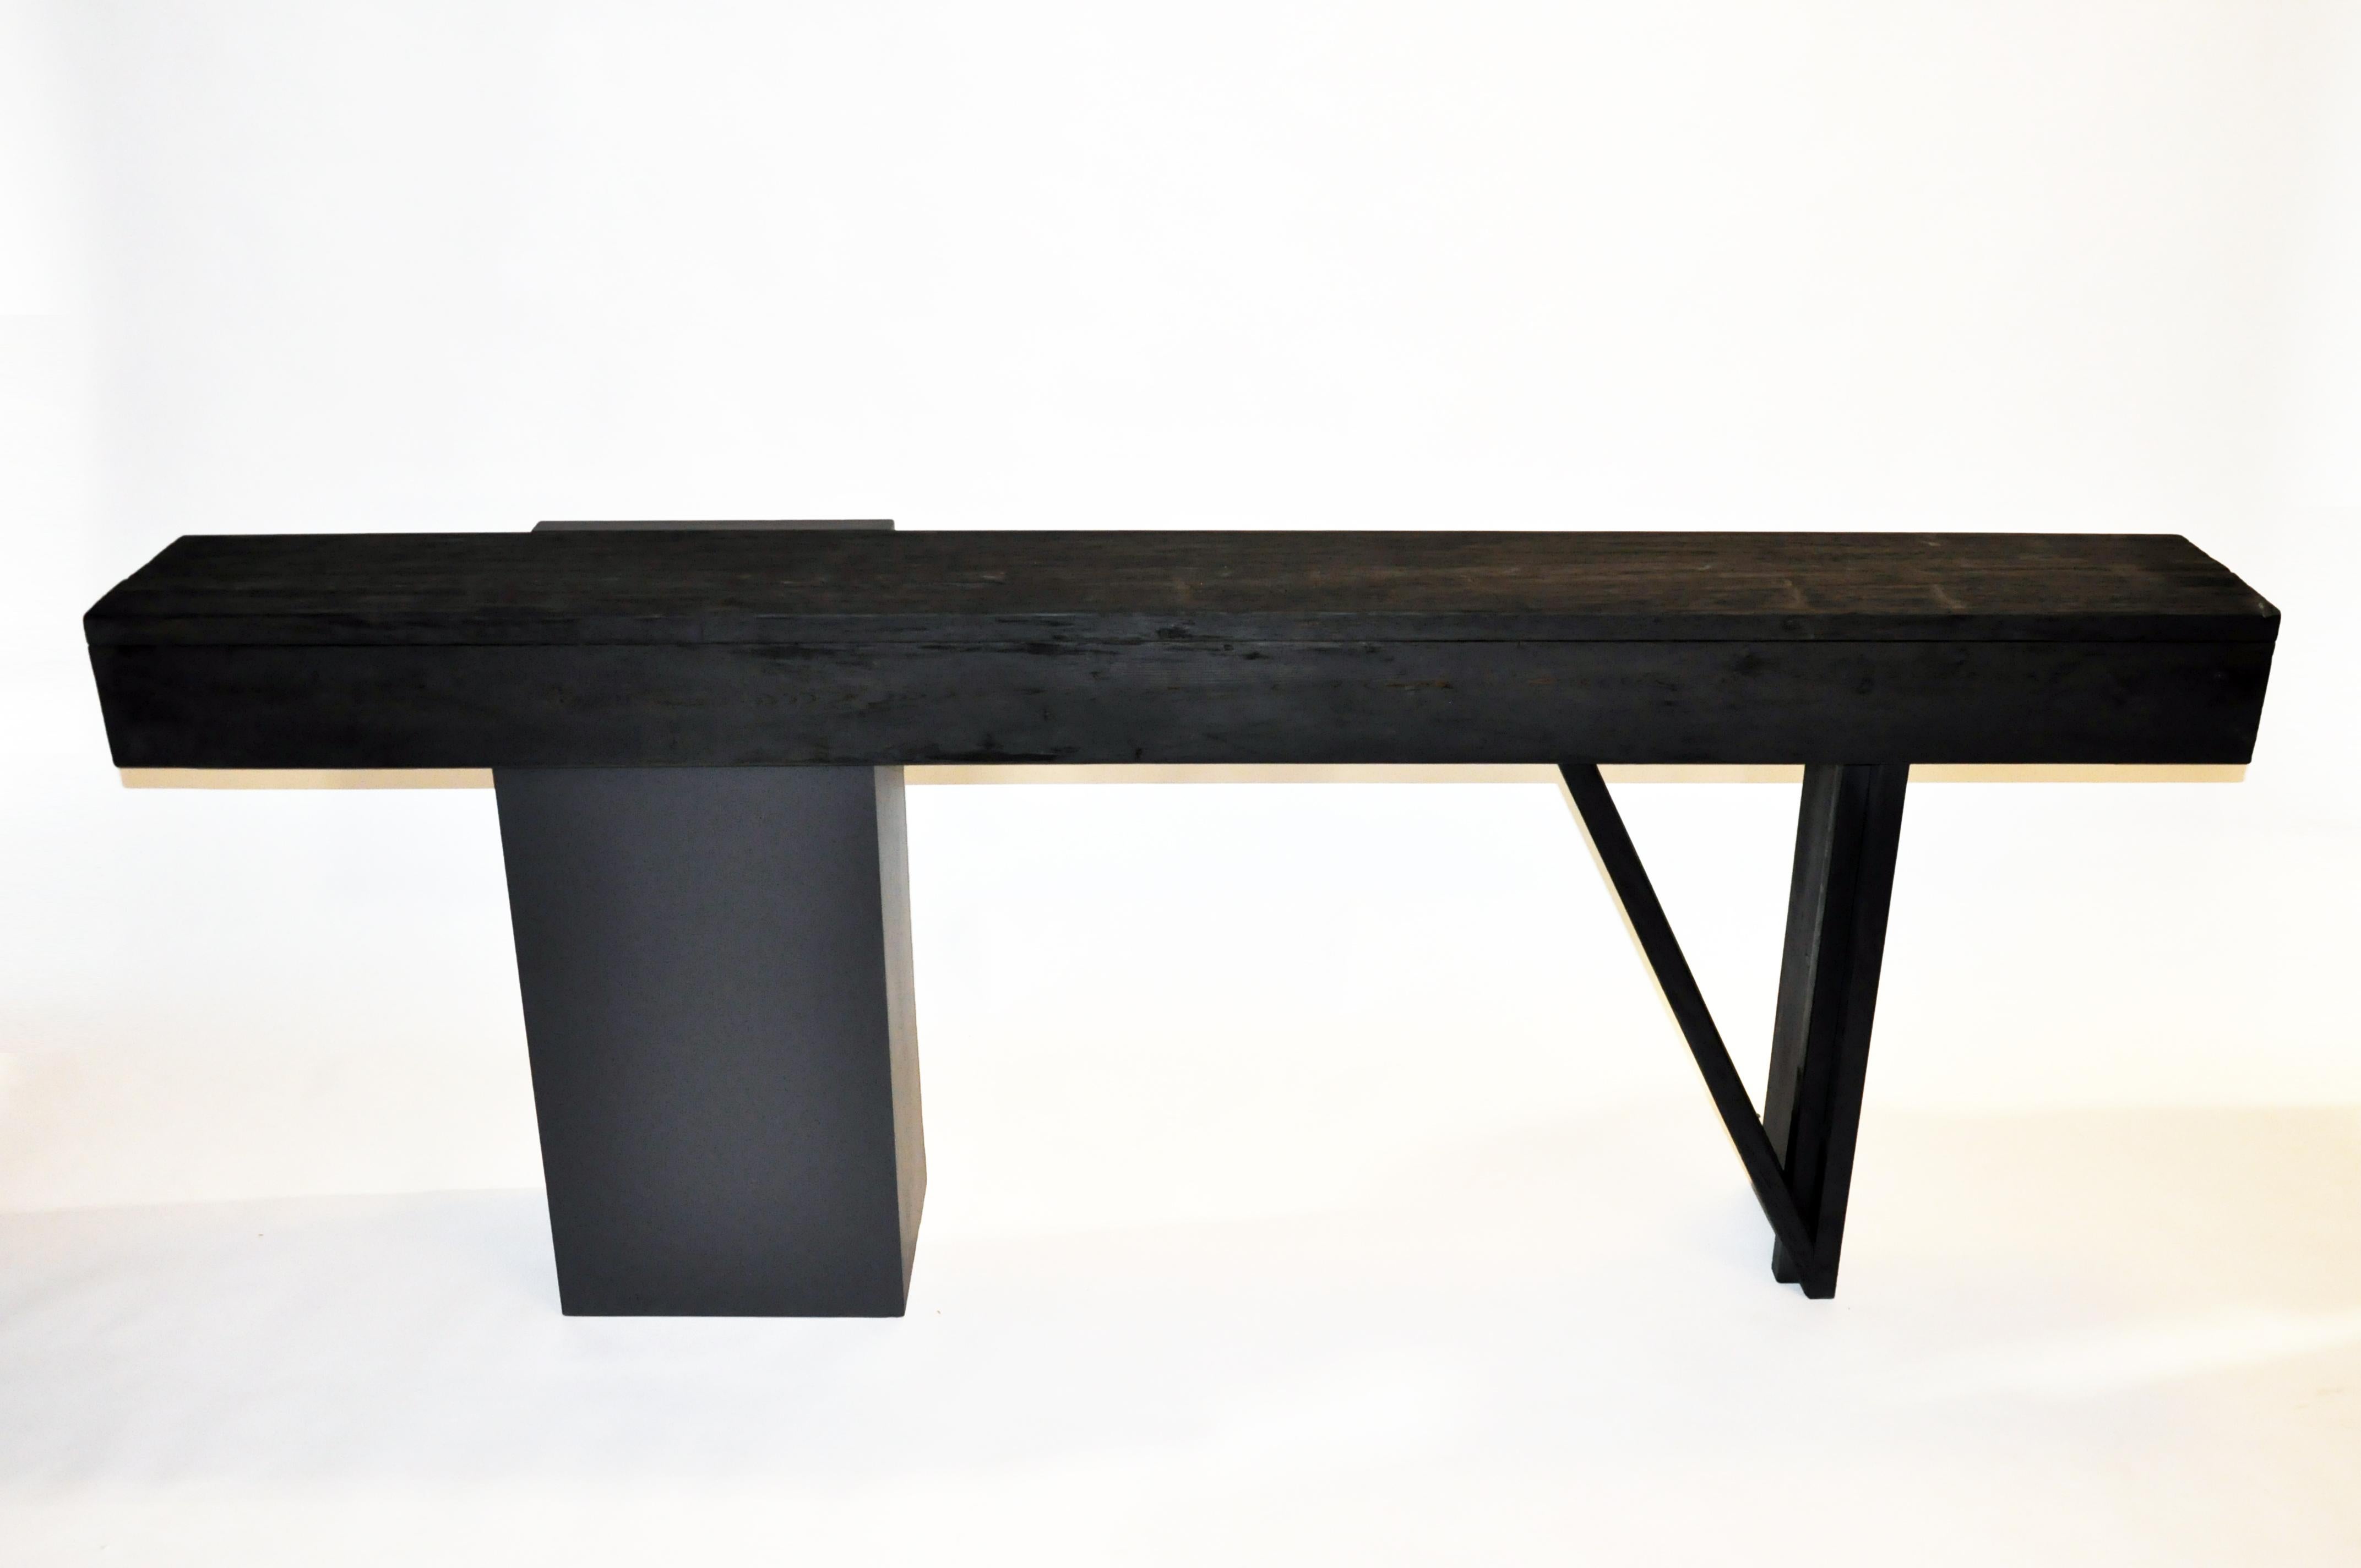 This custom made altar table was made from reclaimed cedar wood, MDF, and black paint circa 2021 in Chicago. The tabletop is cedarwood with parts of the base being MDF. The table has been made black for a clean and modern feel.
 